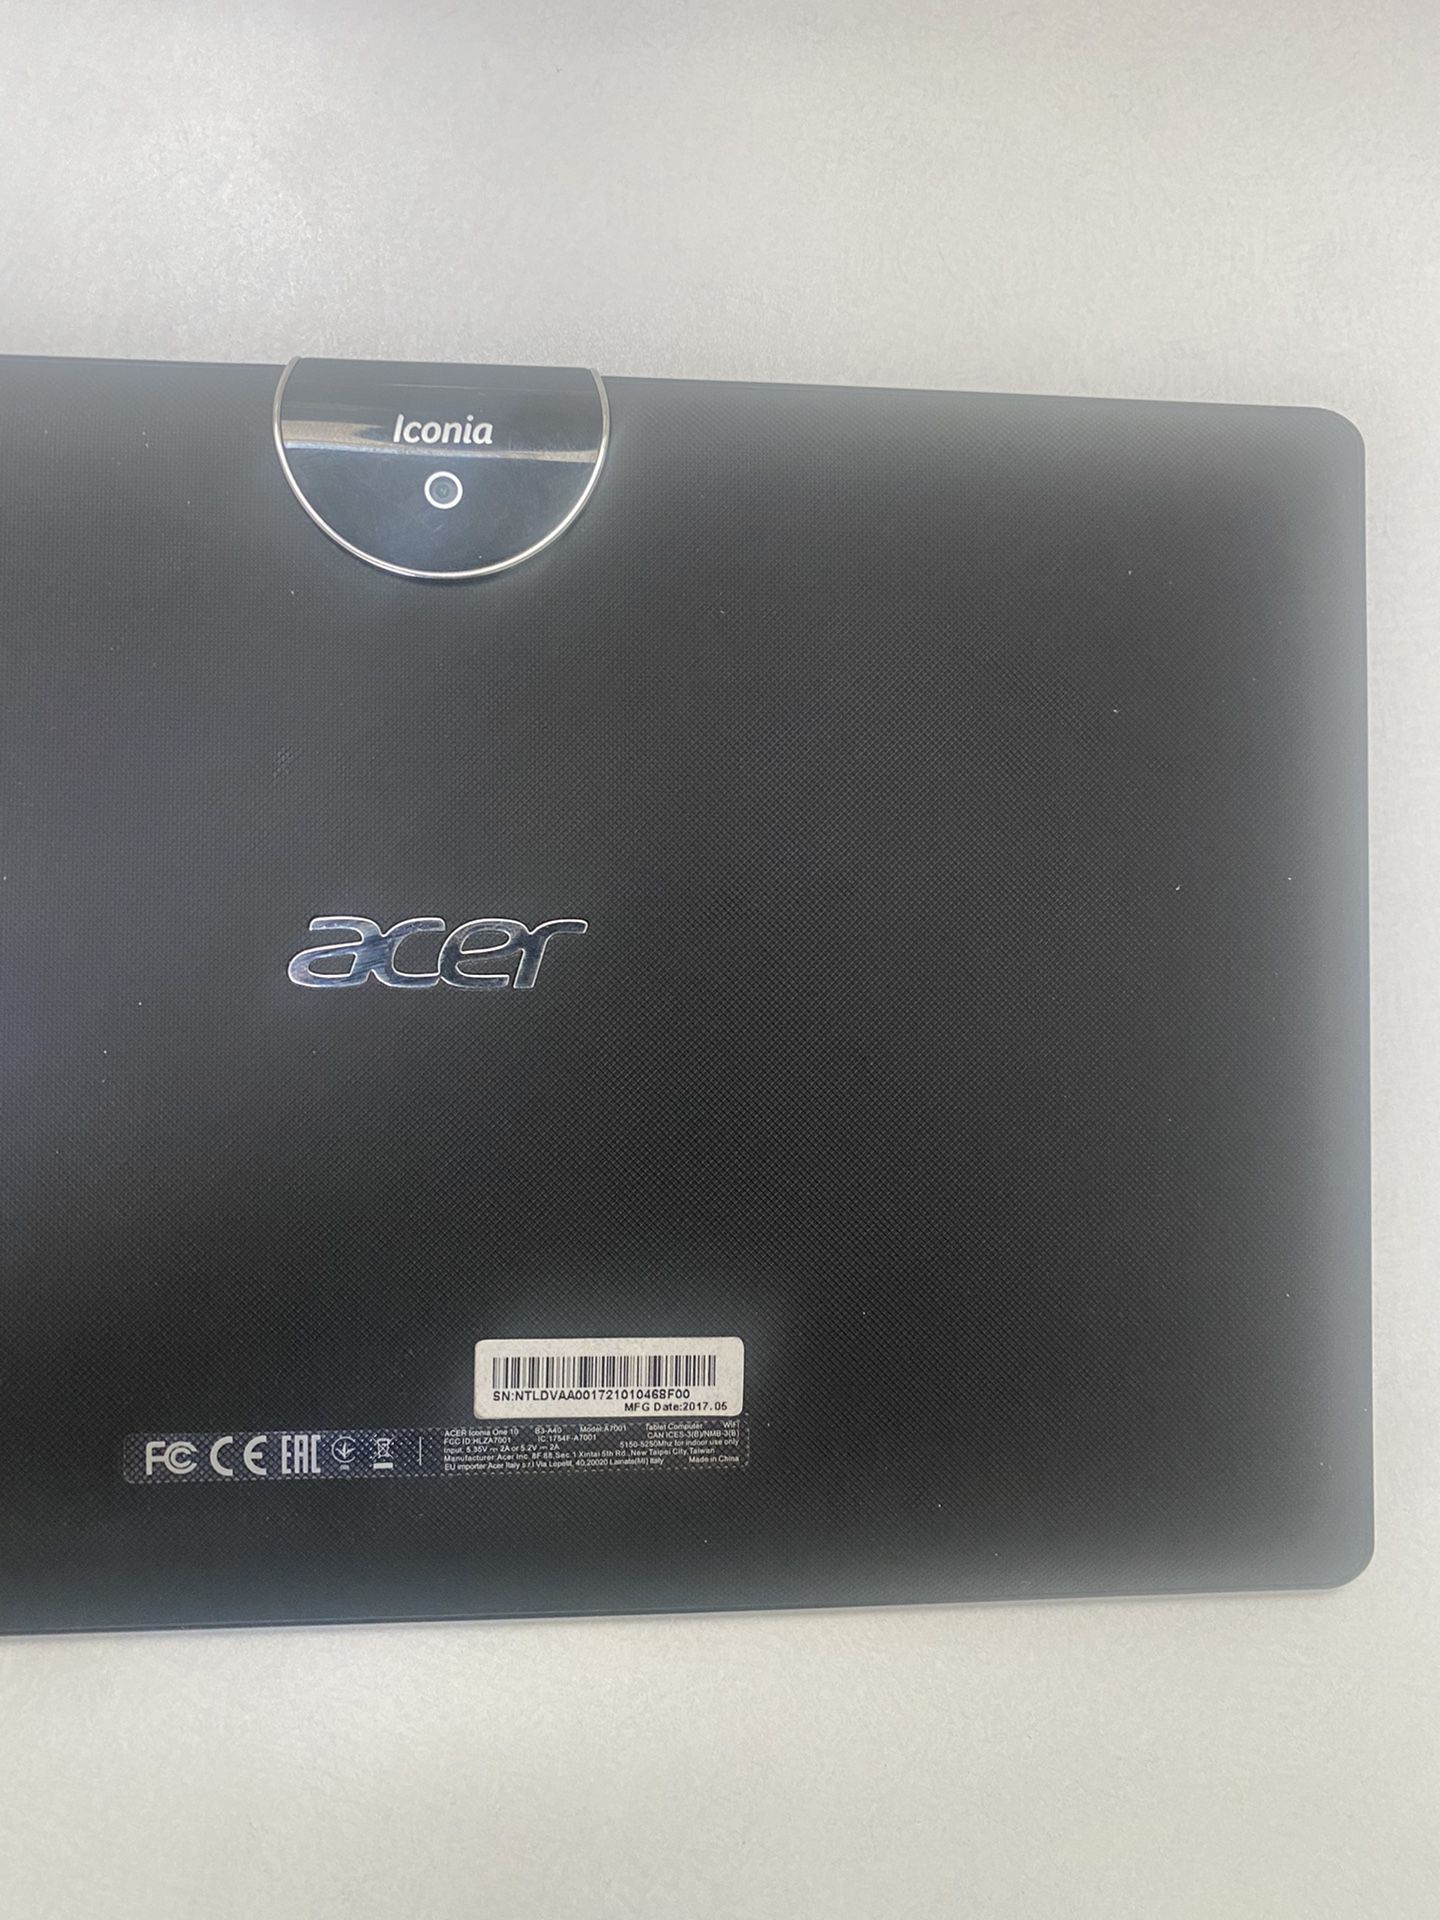 Acer Iconia 1 Tablet Works Great Comes With Charger 